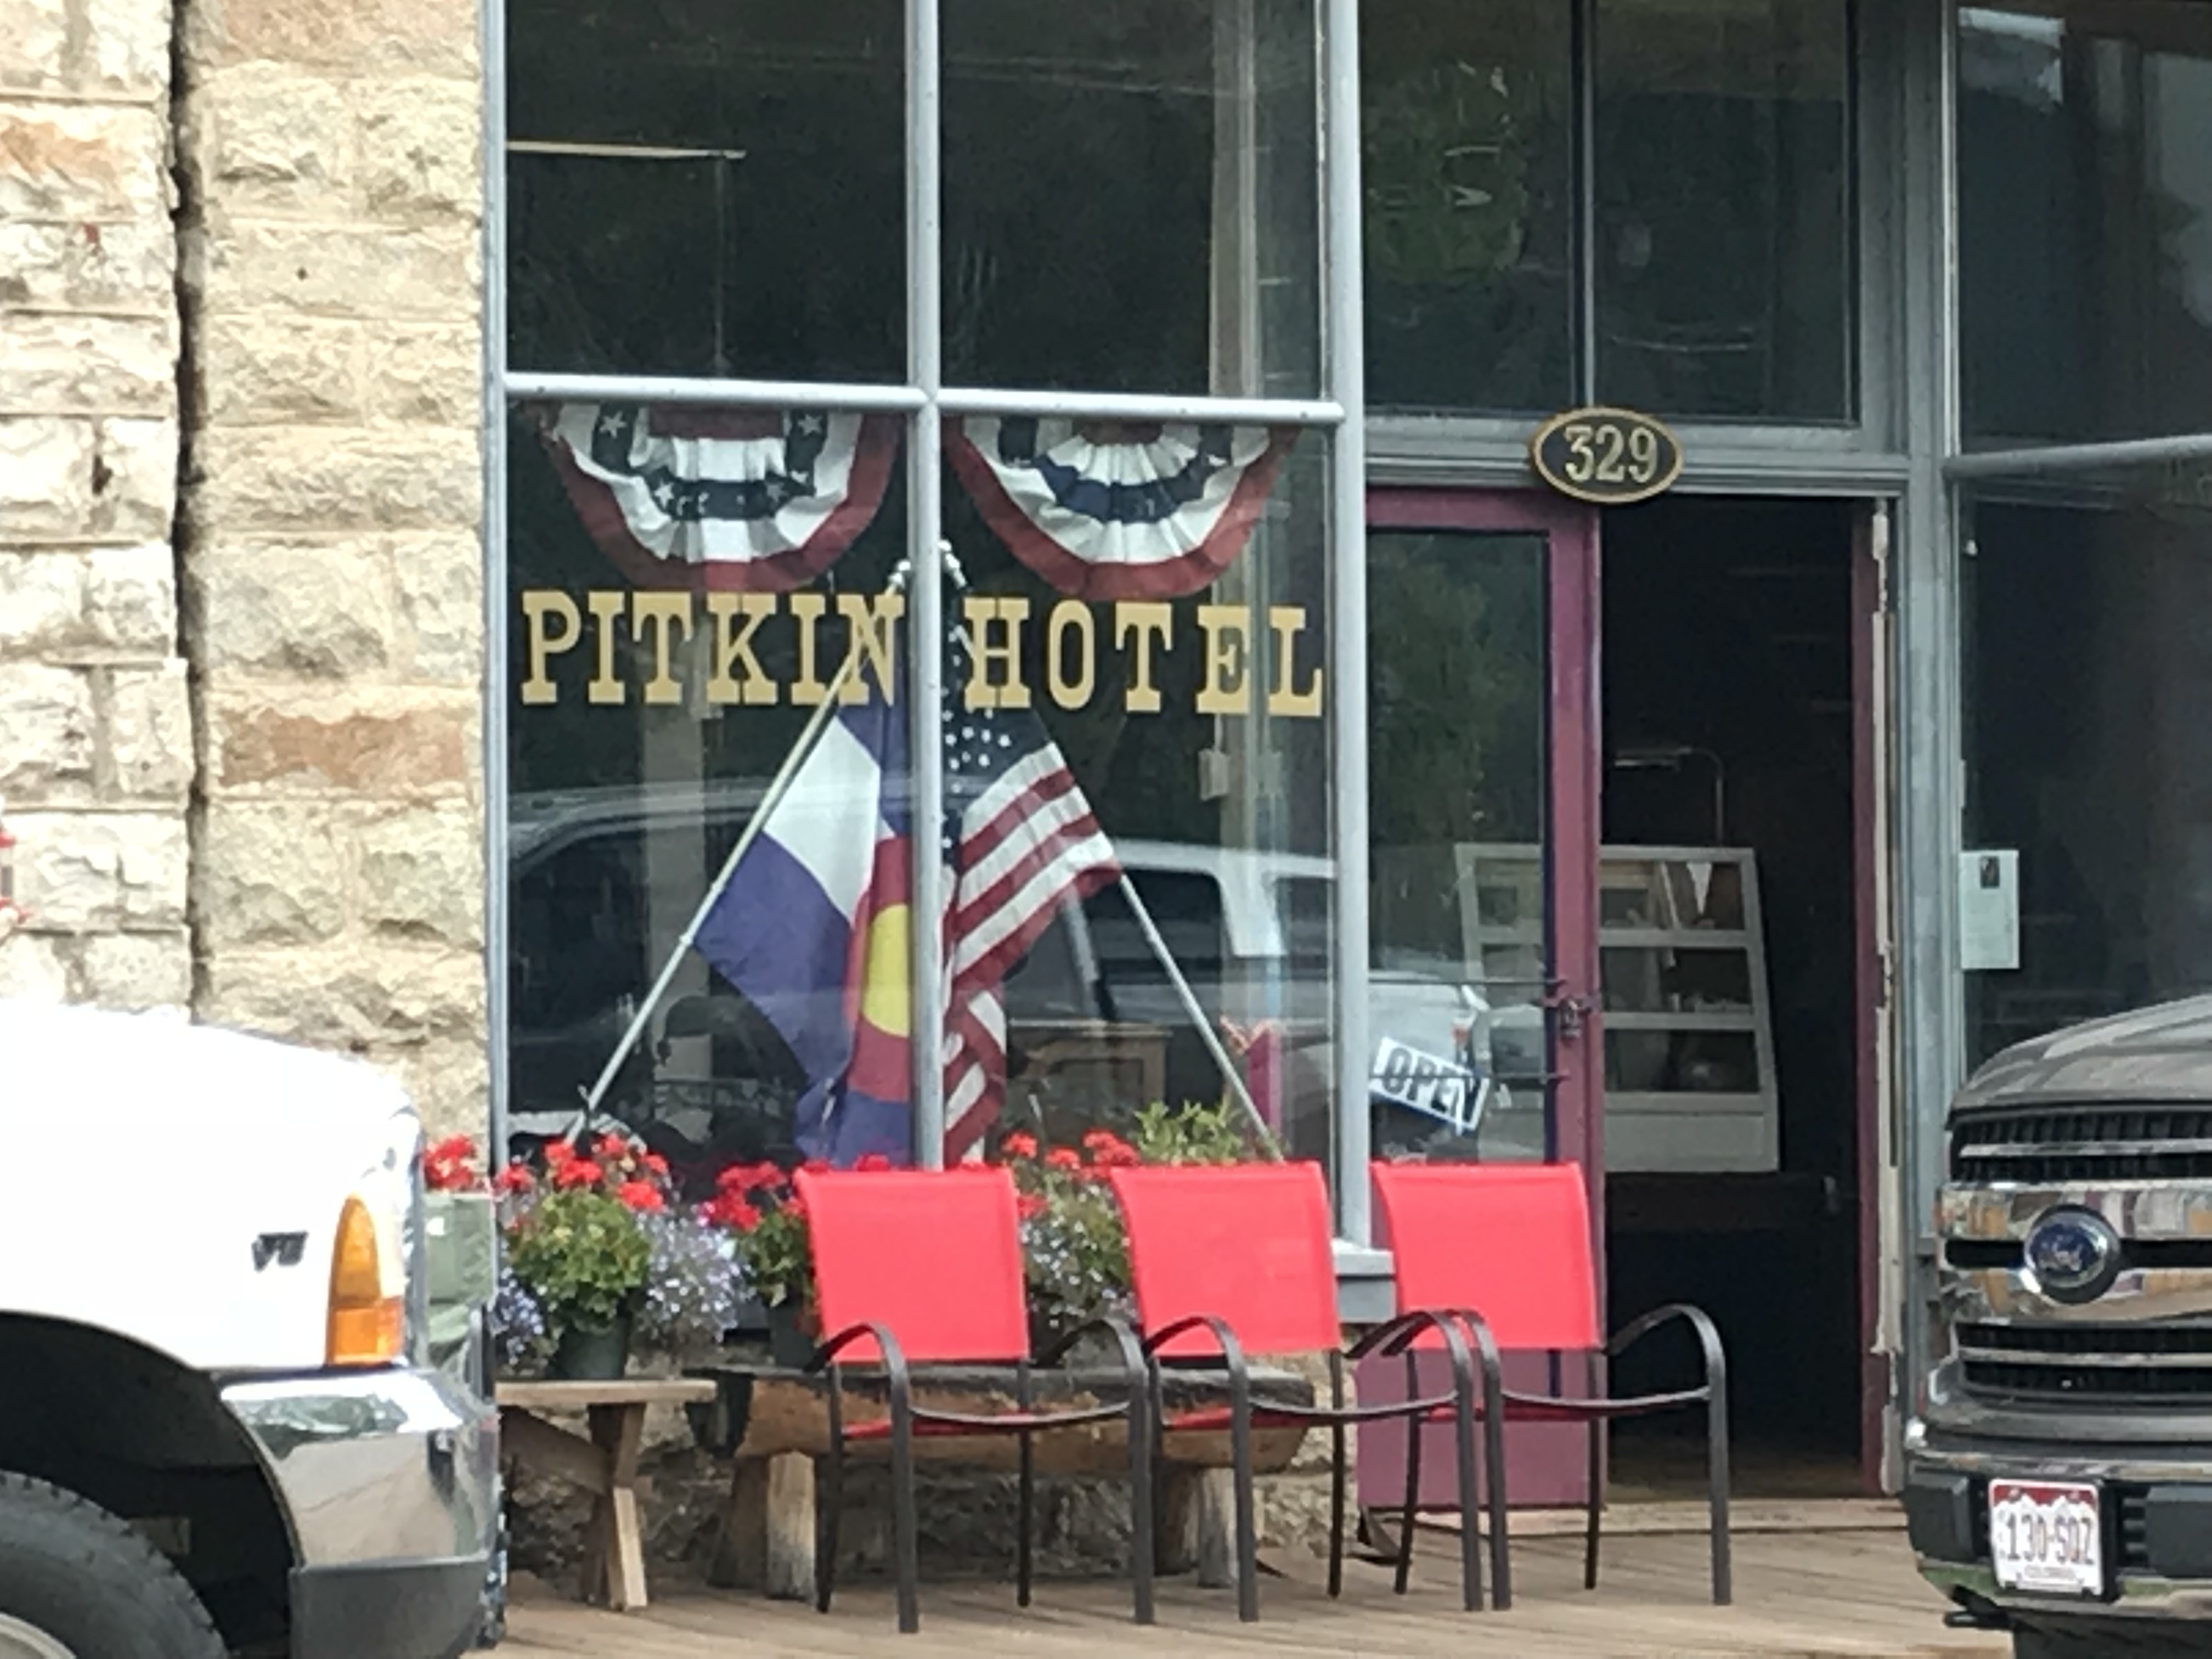 Letters read "Pitkin Hotel" on the glass front of the building. Modern-day trucks sit on the street out front